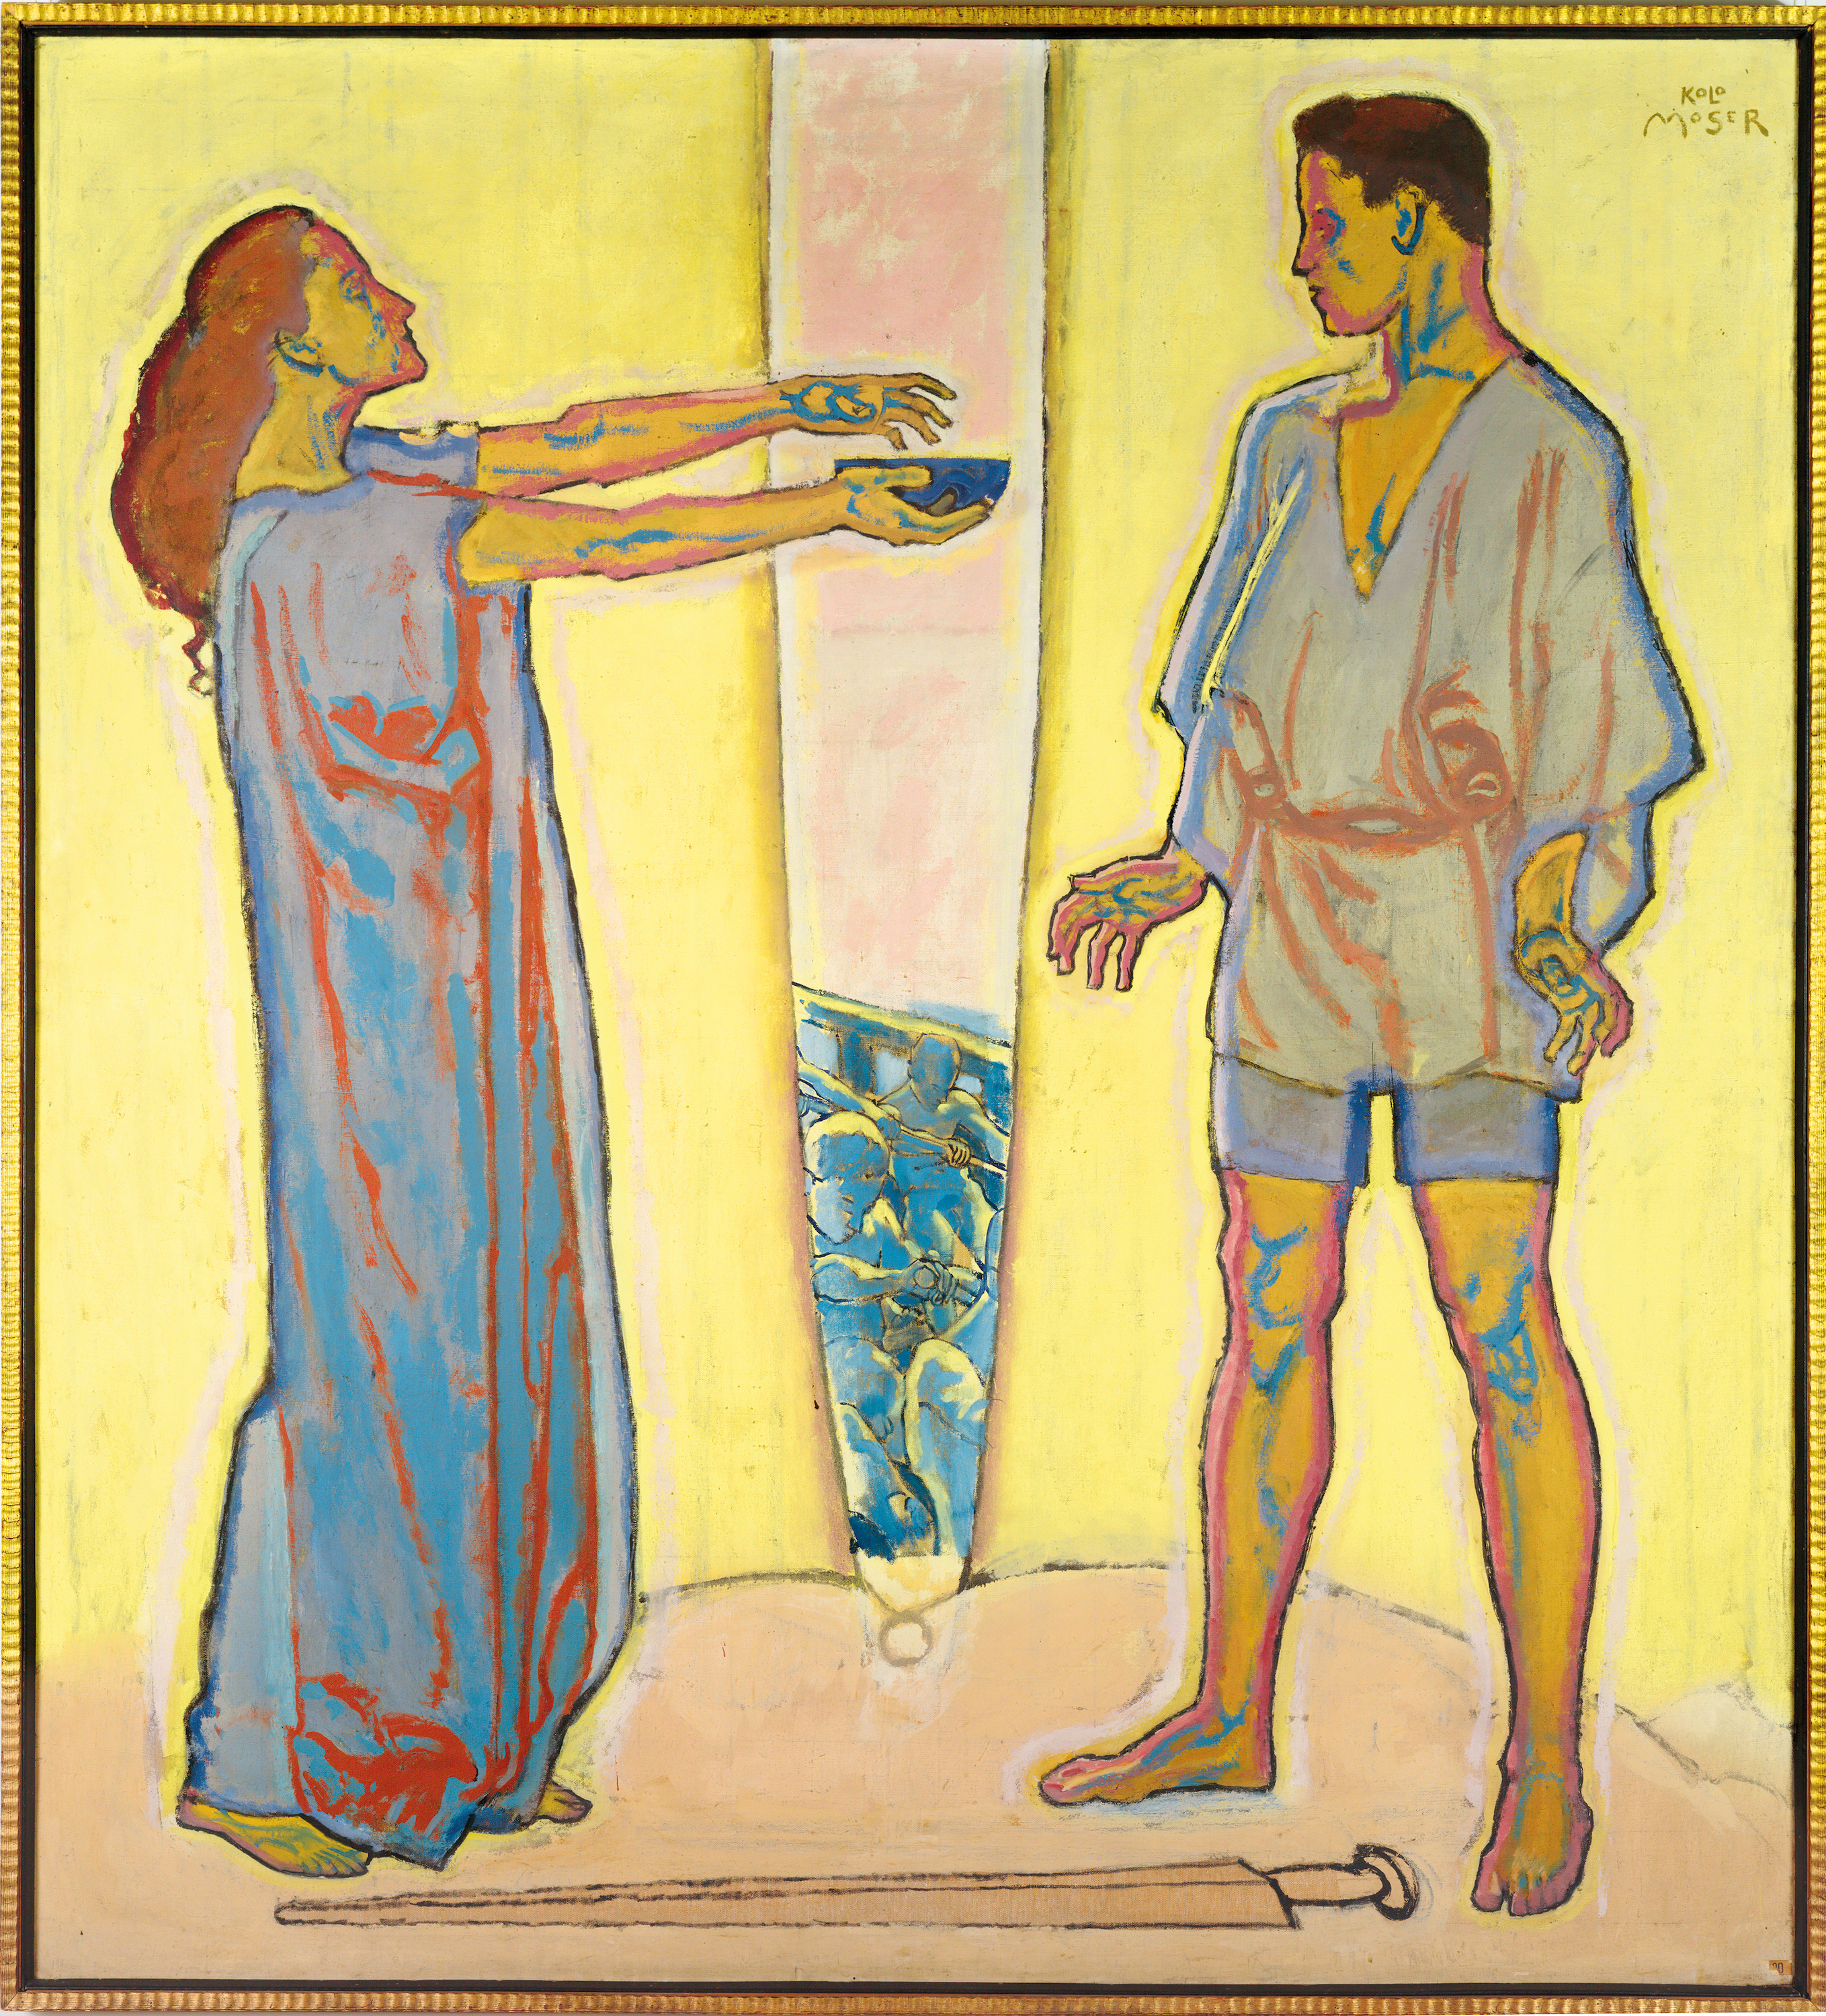 The Love Potion (Tristan and Isolde) by Koloman Moser - 1913 - 195 x 210 cm Leopold Museum